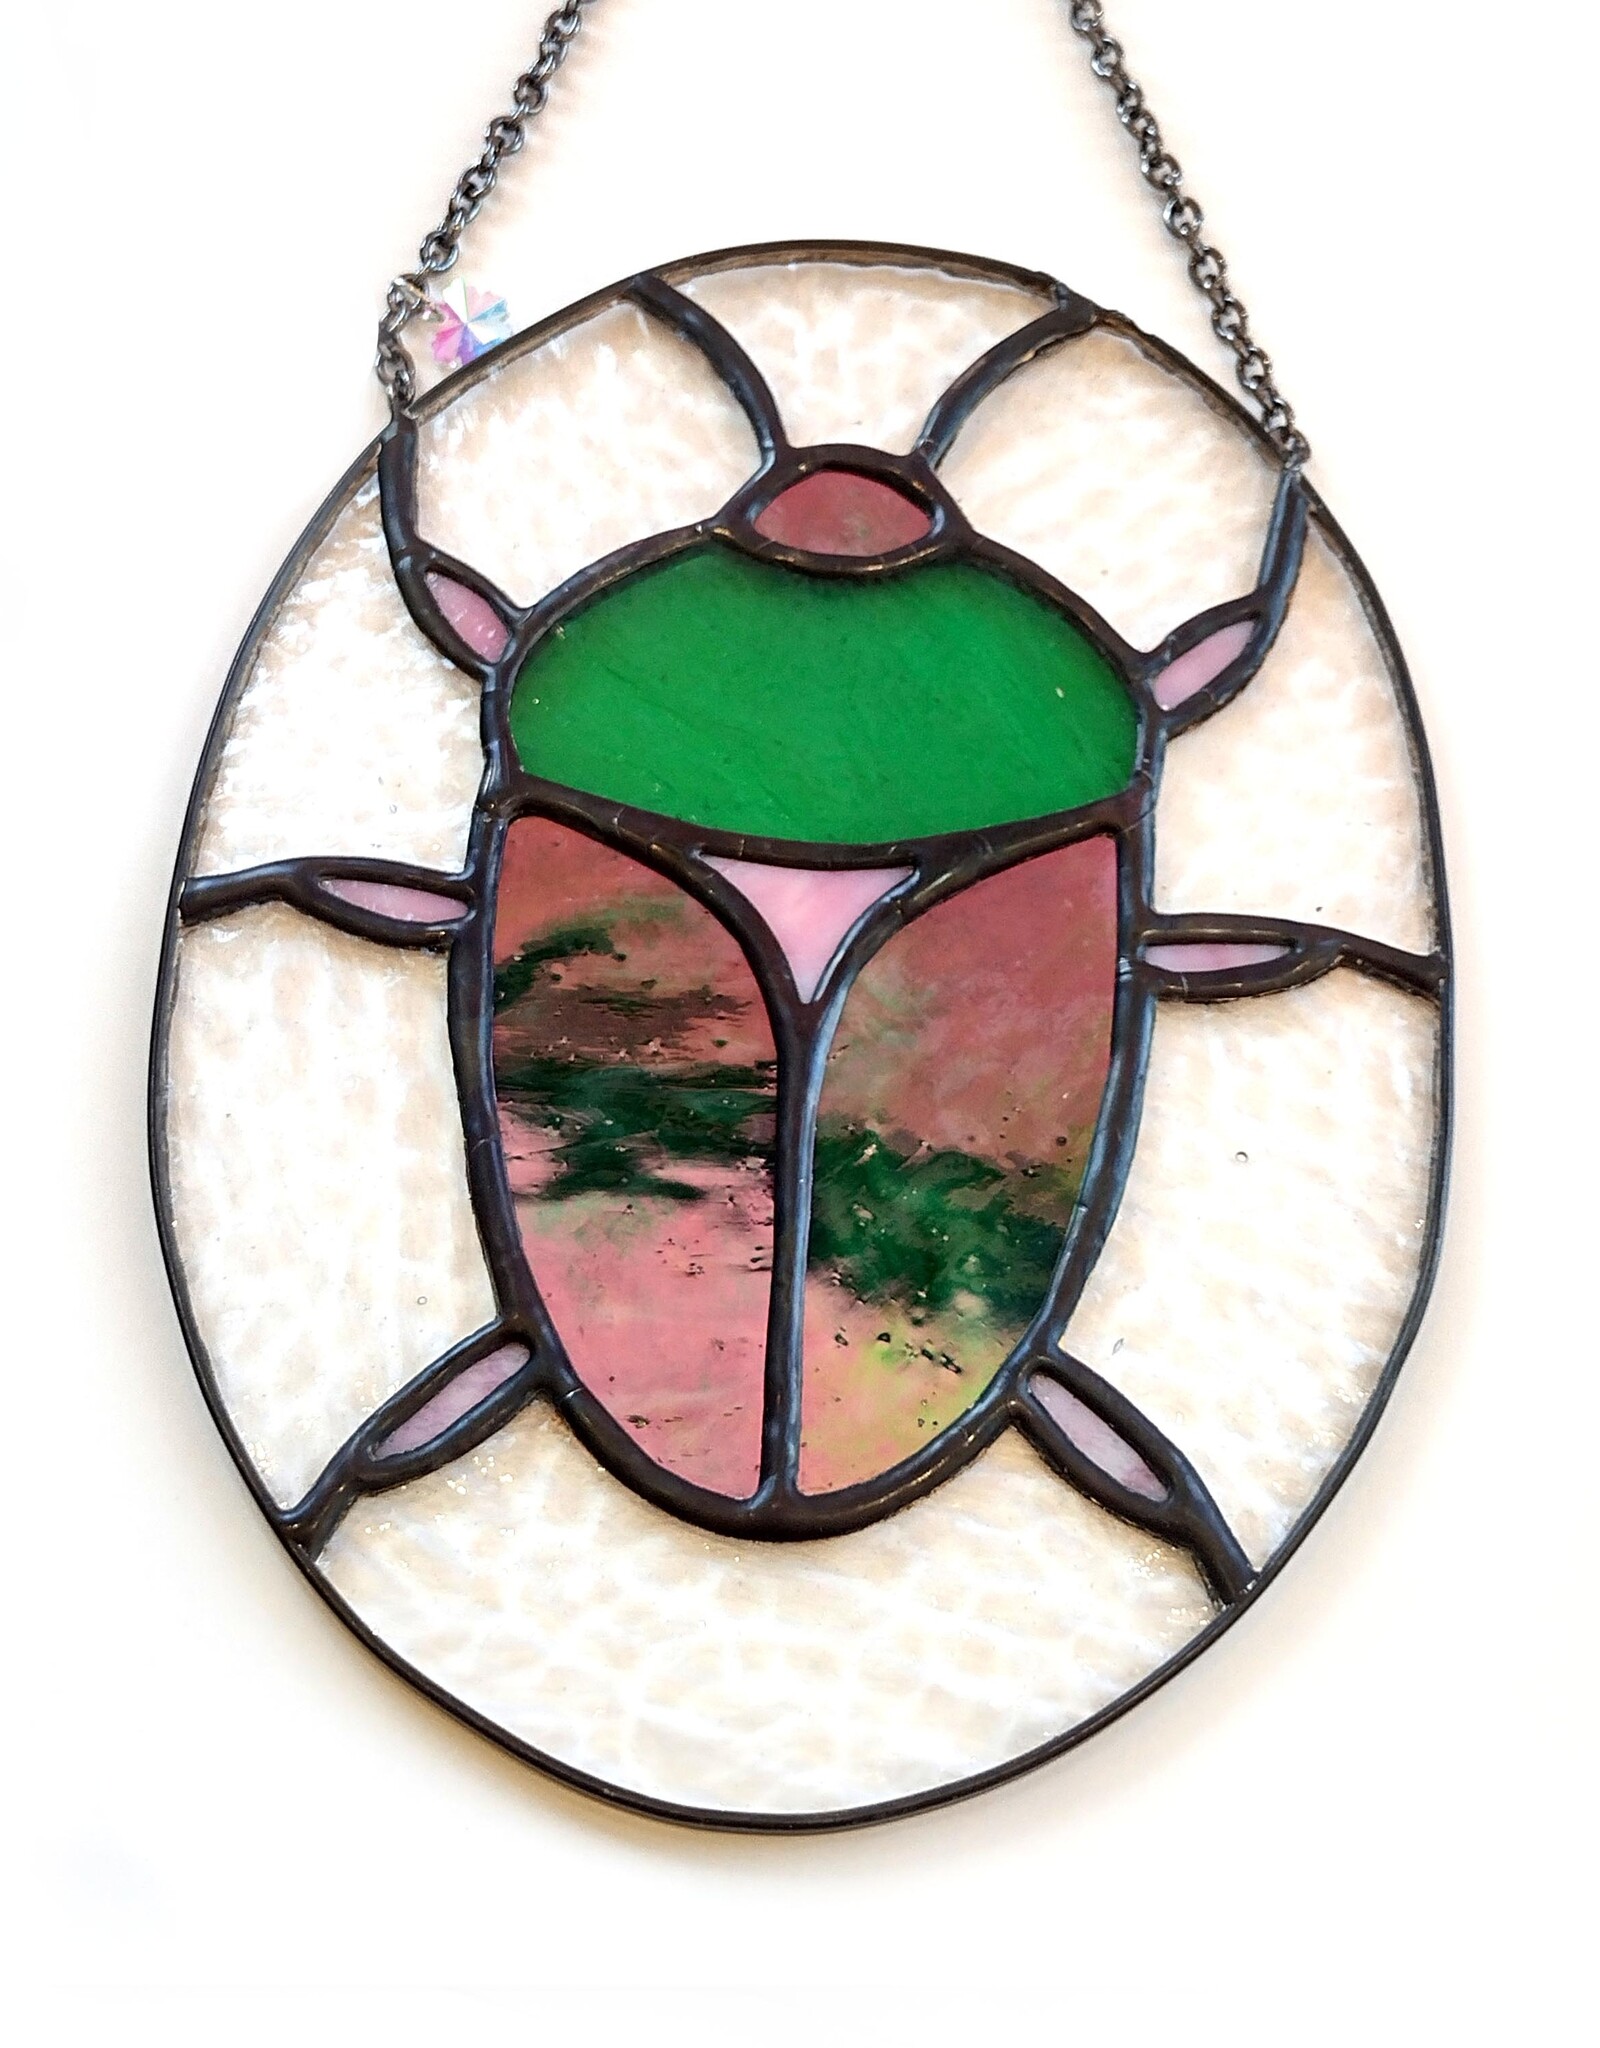 Lovely Beetle -(clear) Stained Glass by Carley Brown